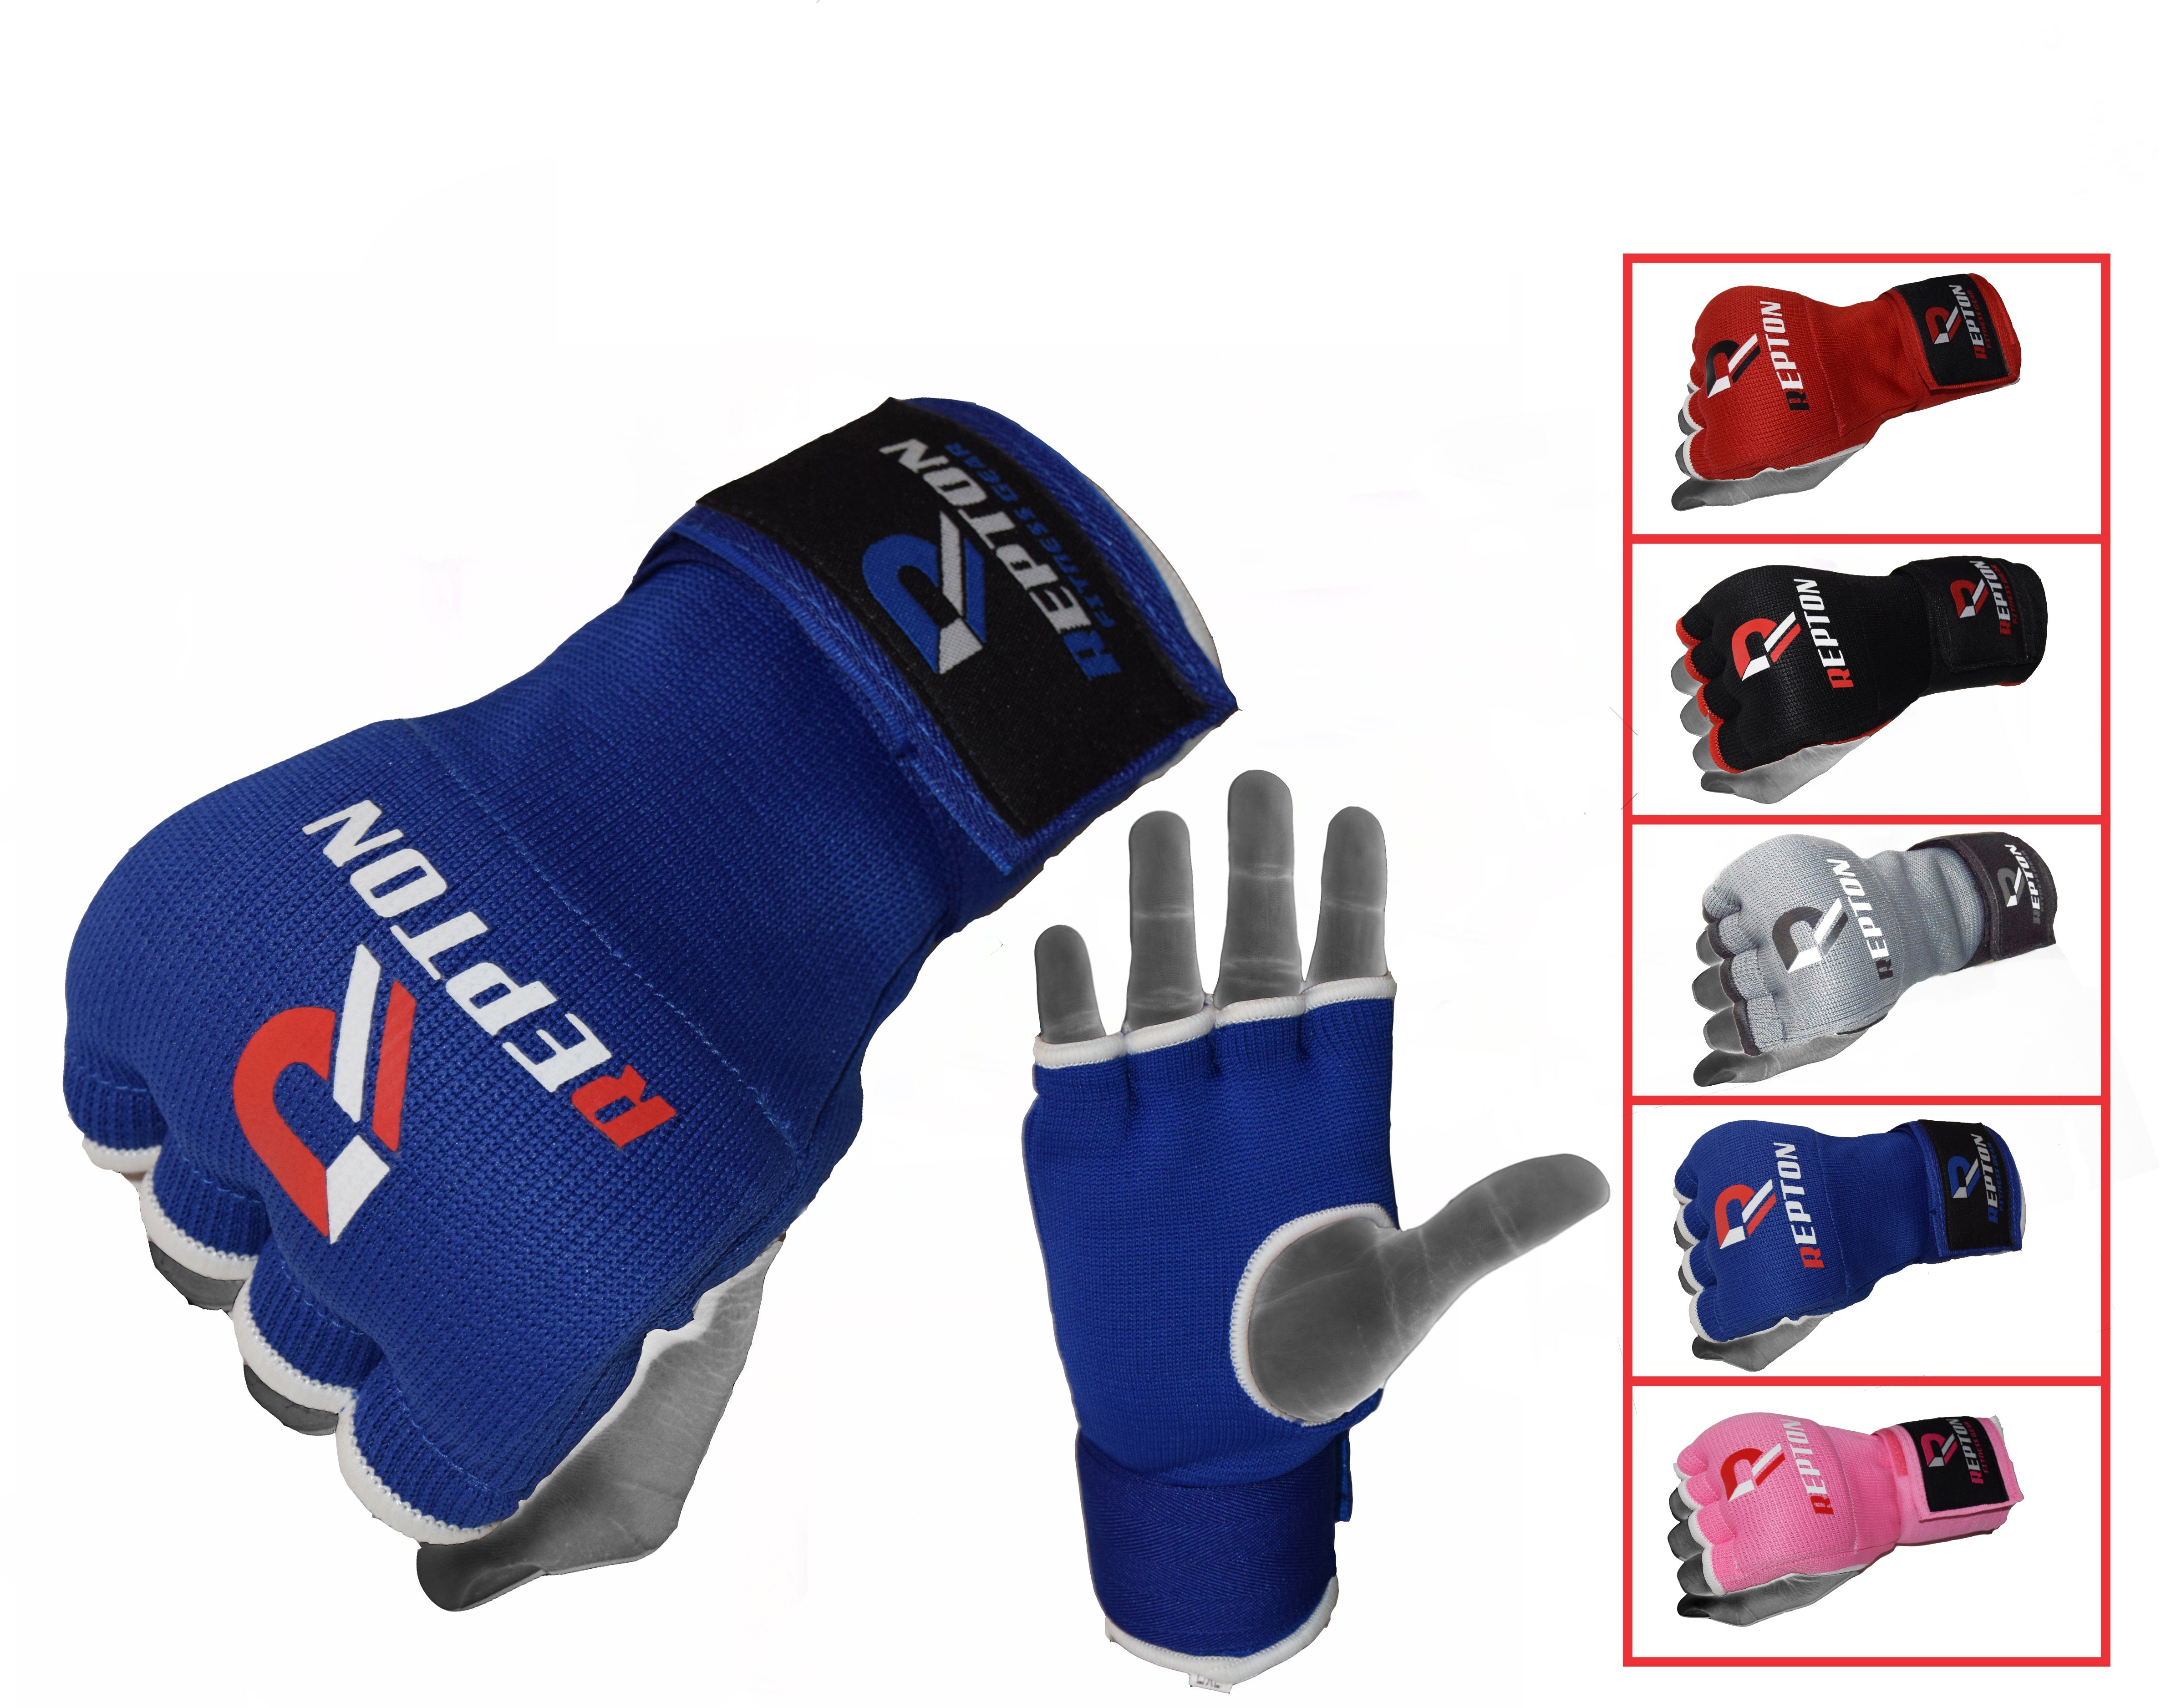 Gel Padded Inner Gloves Hook & Loop Wrist Strap for Knuckle Protection Repton Fitness and Boxing Gears